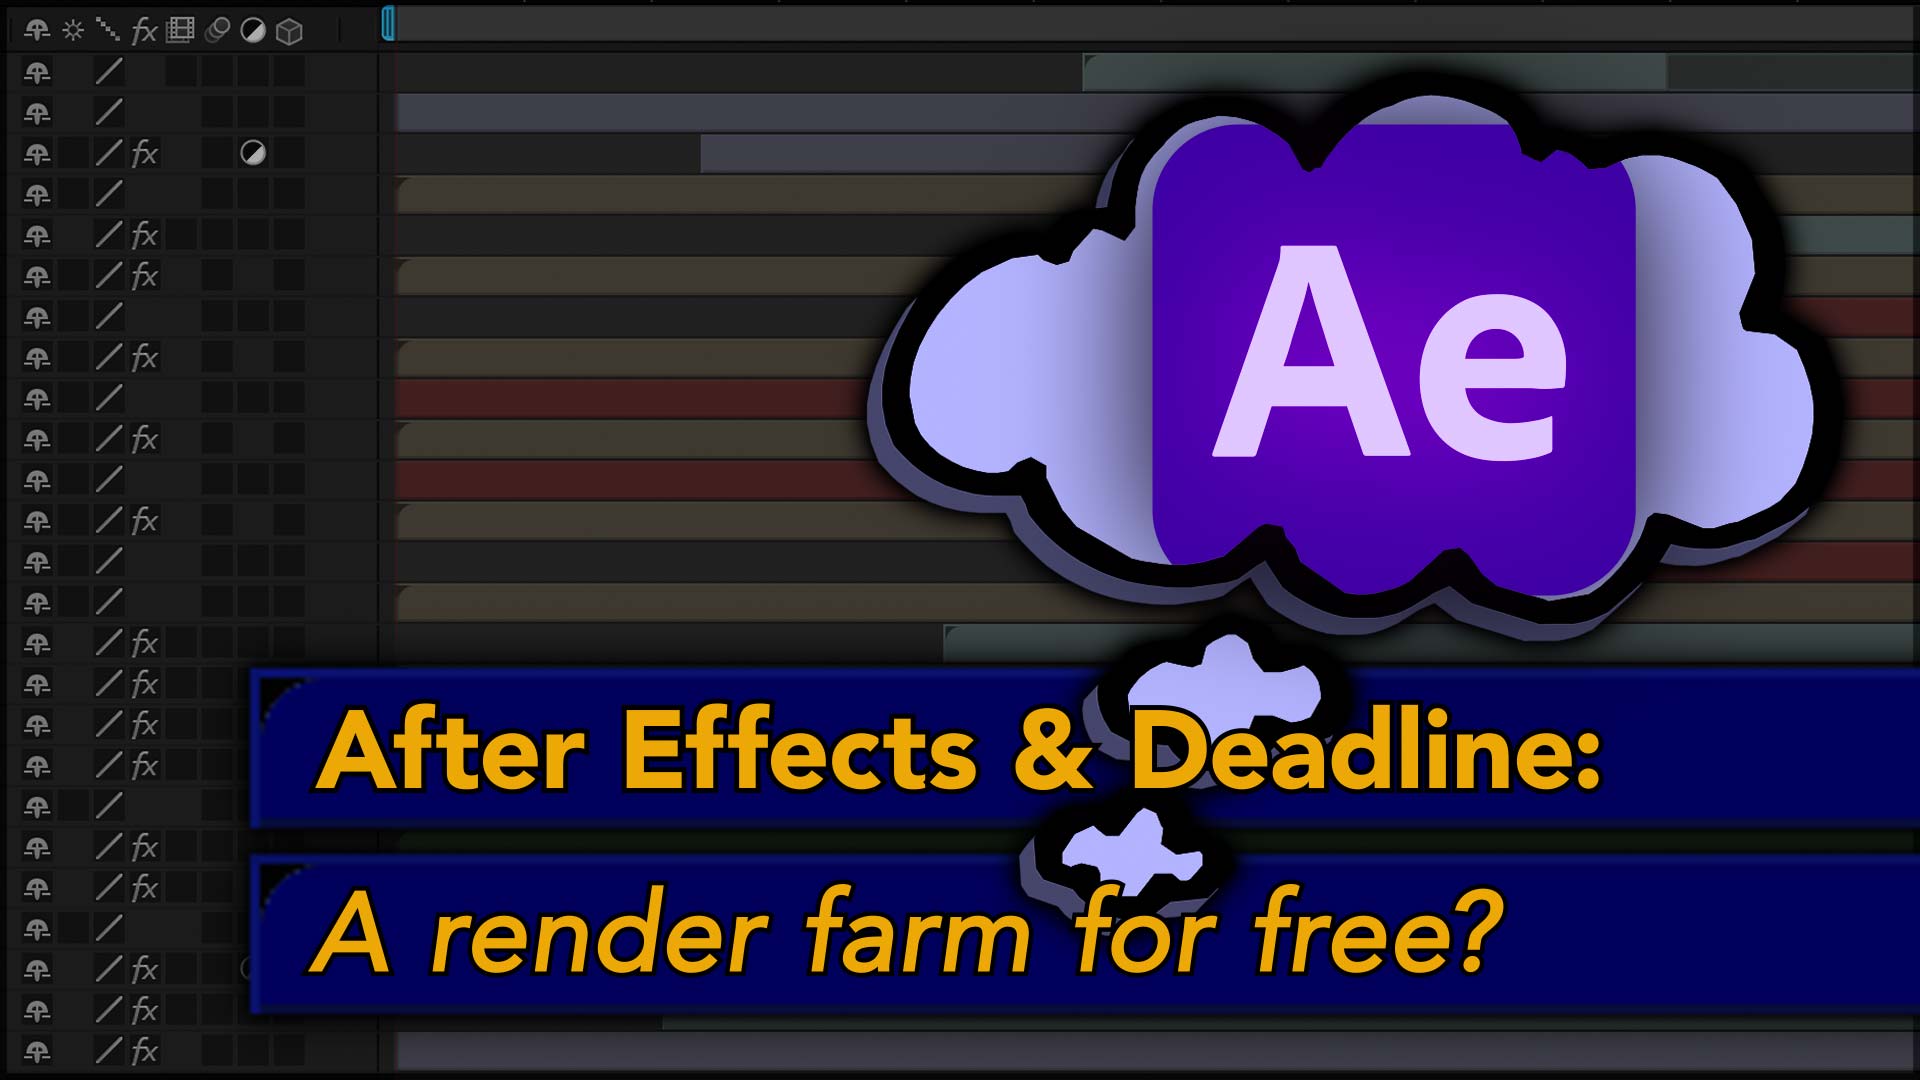 After Effects: Using Deadline for a Render Farm 21